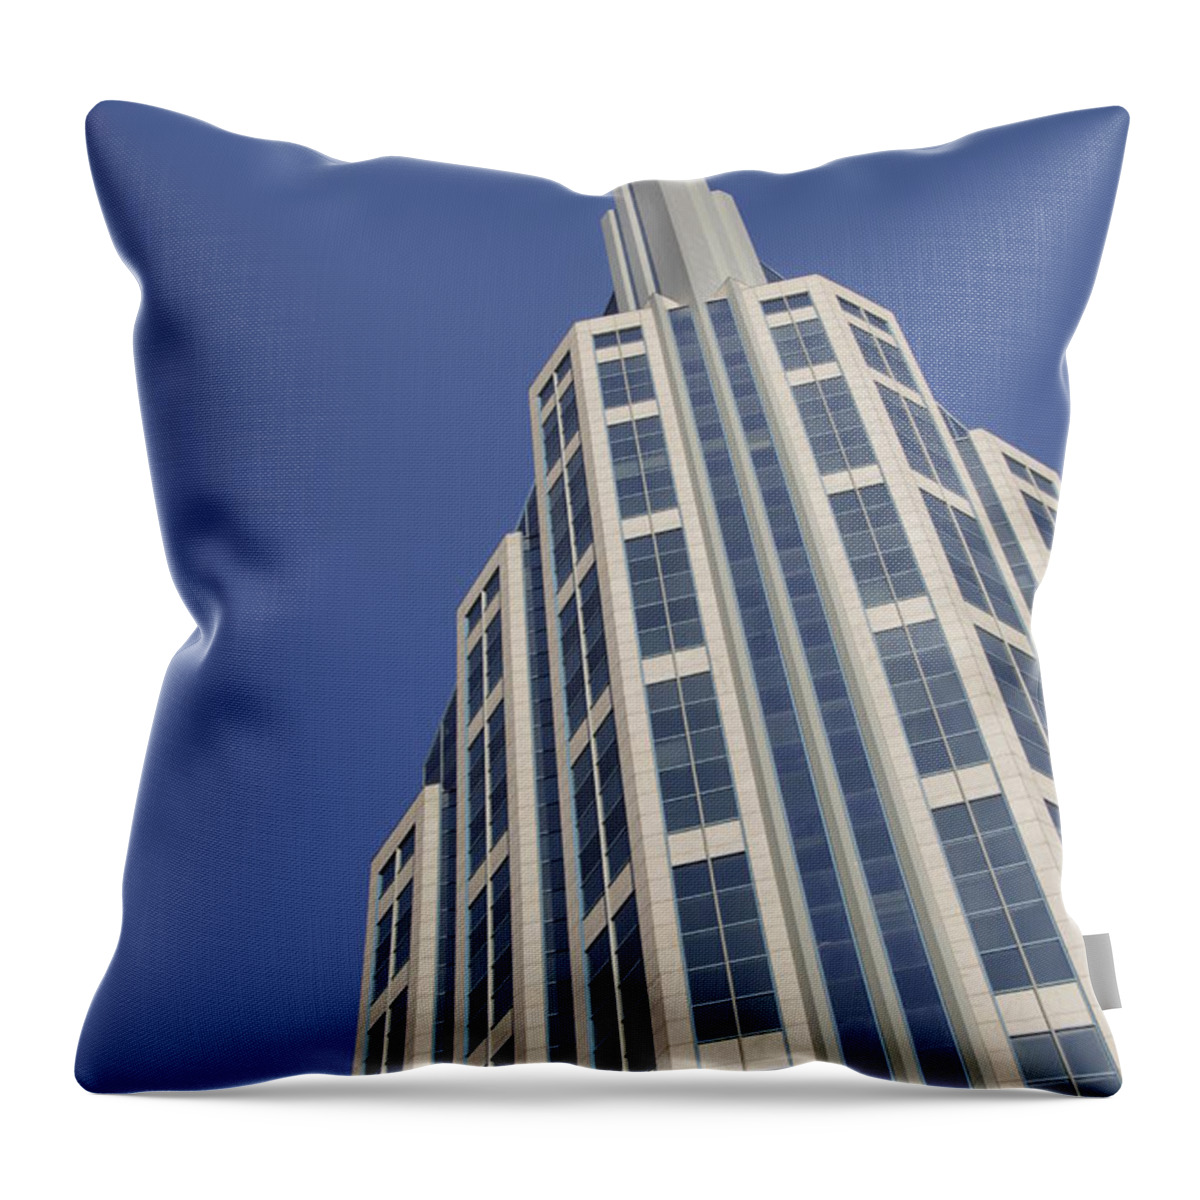 Nashville Throw Pillow featuring the photograph Regions Financial Corp Nashville by Valerie Collins